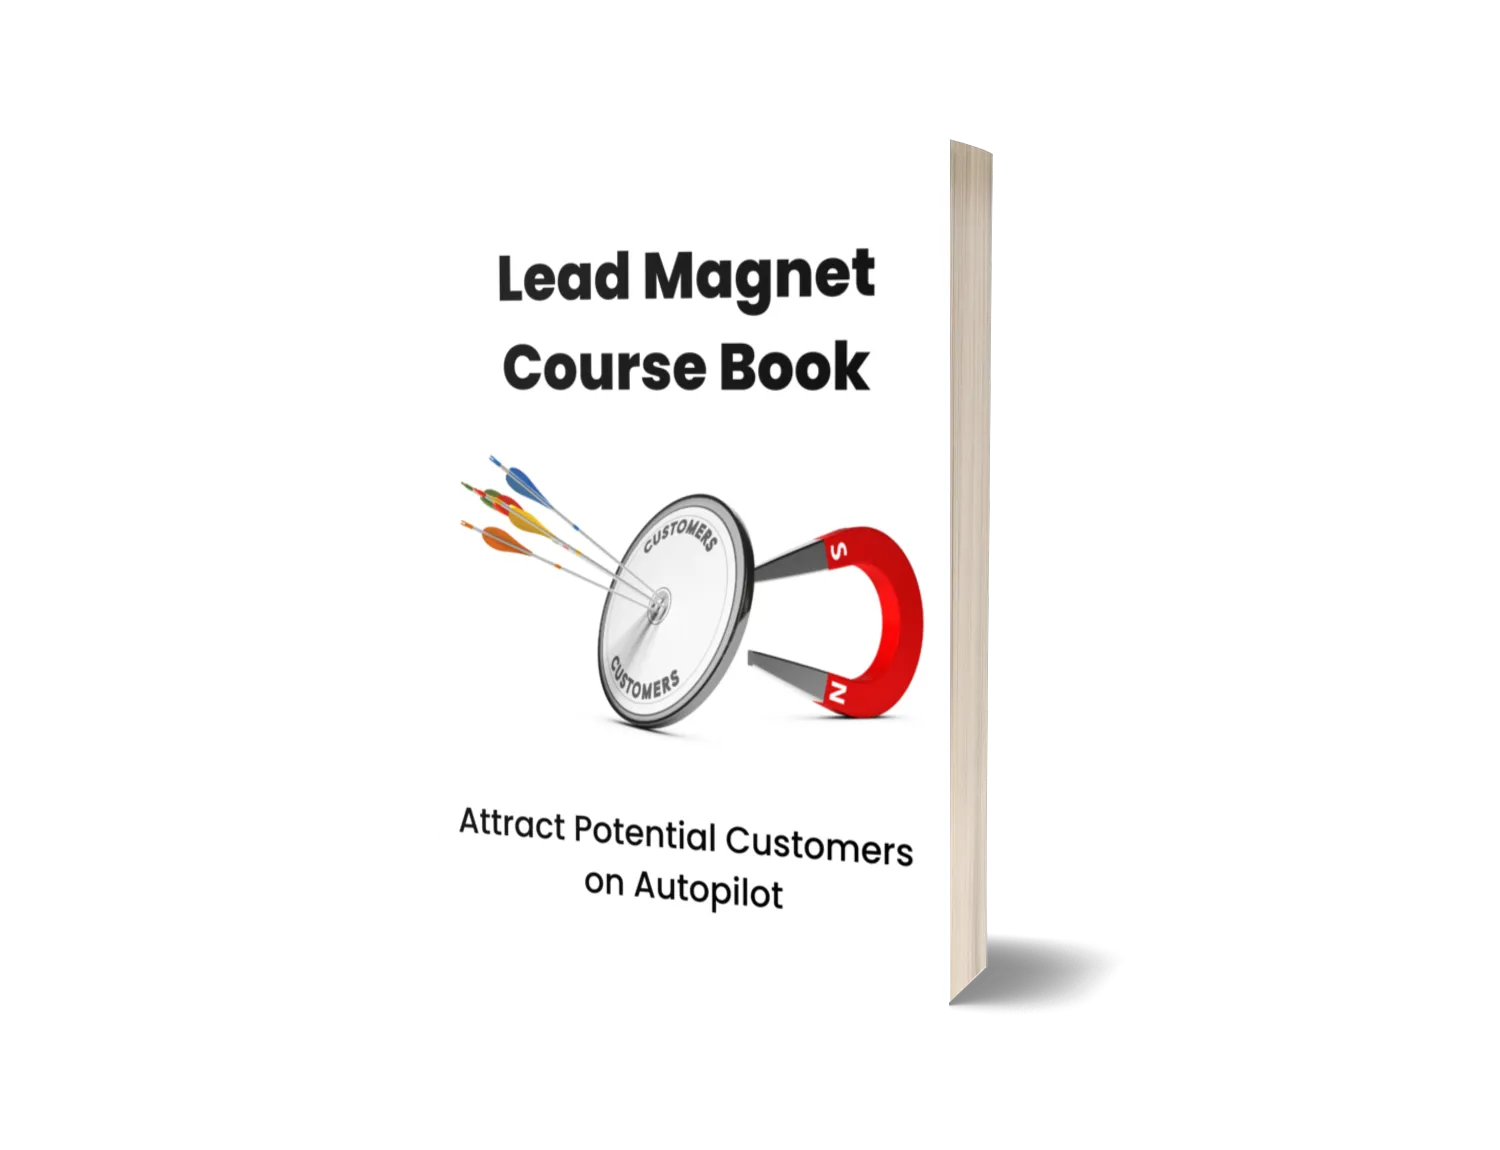 Lead Magnet Course Book